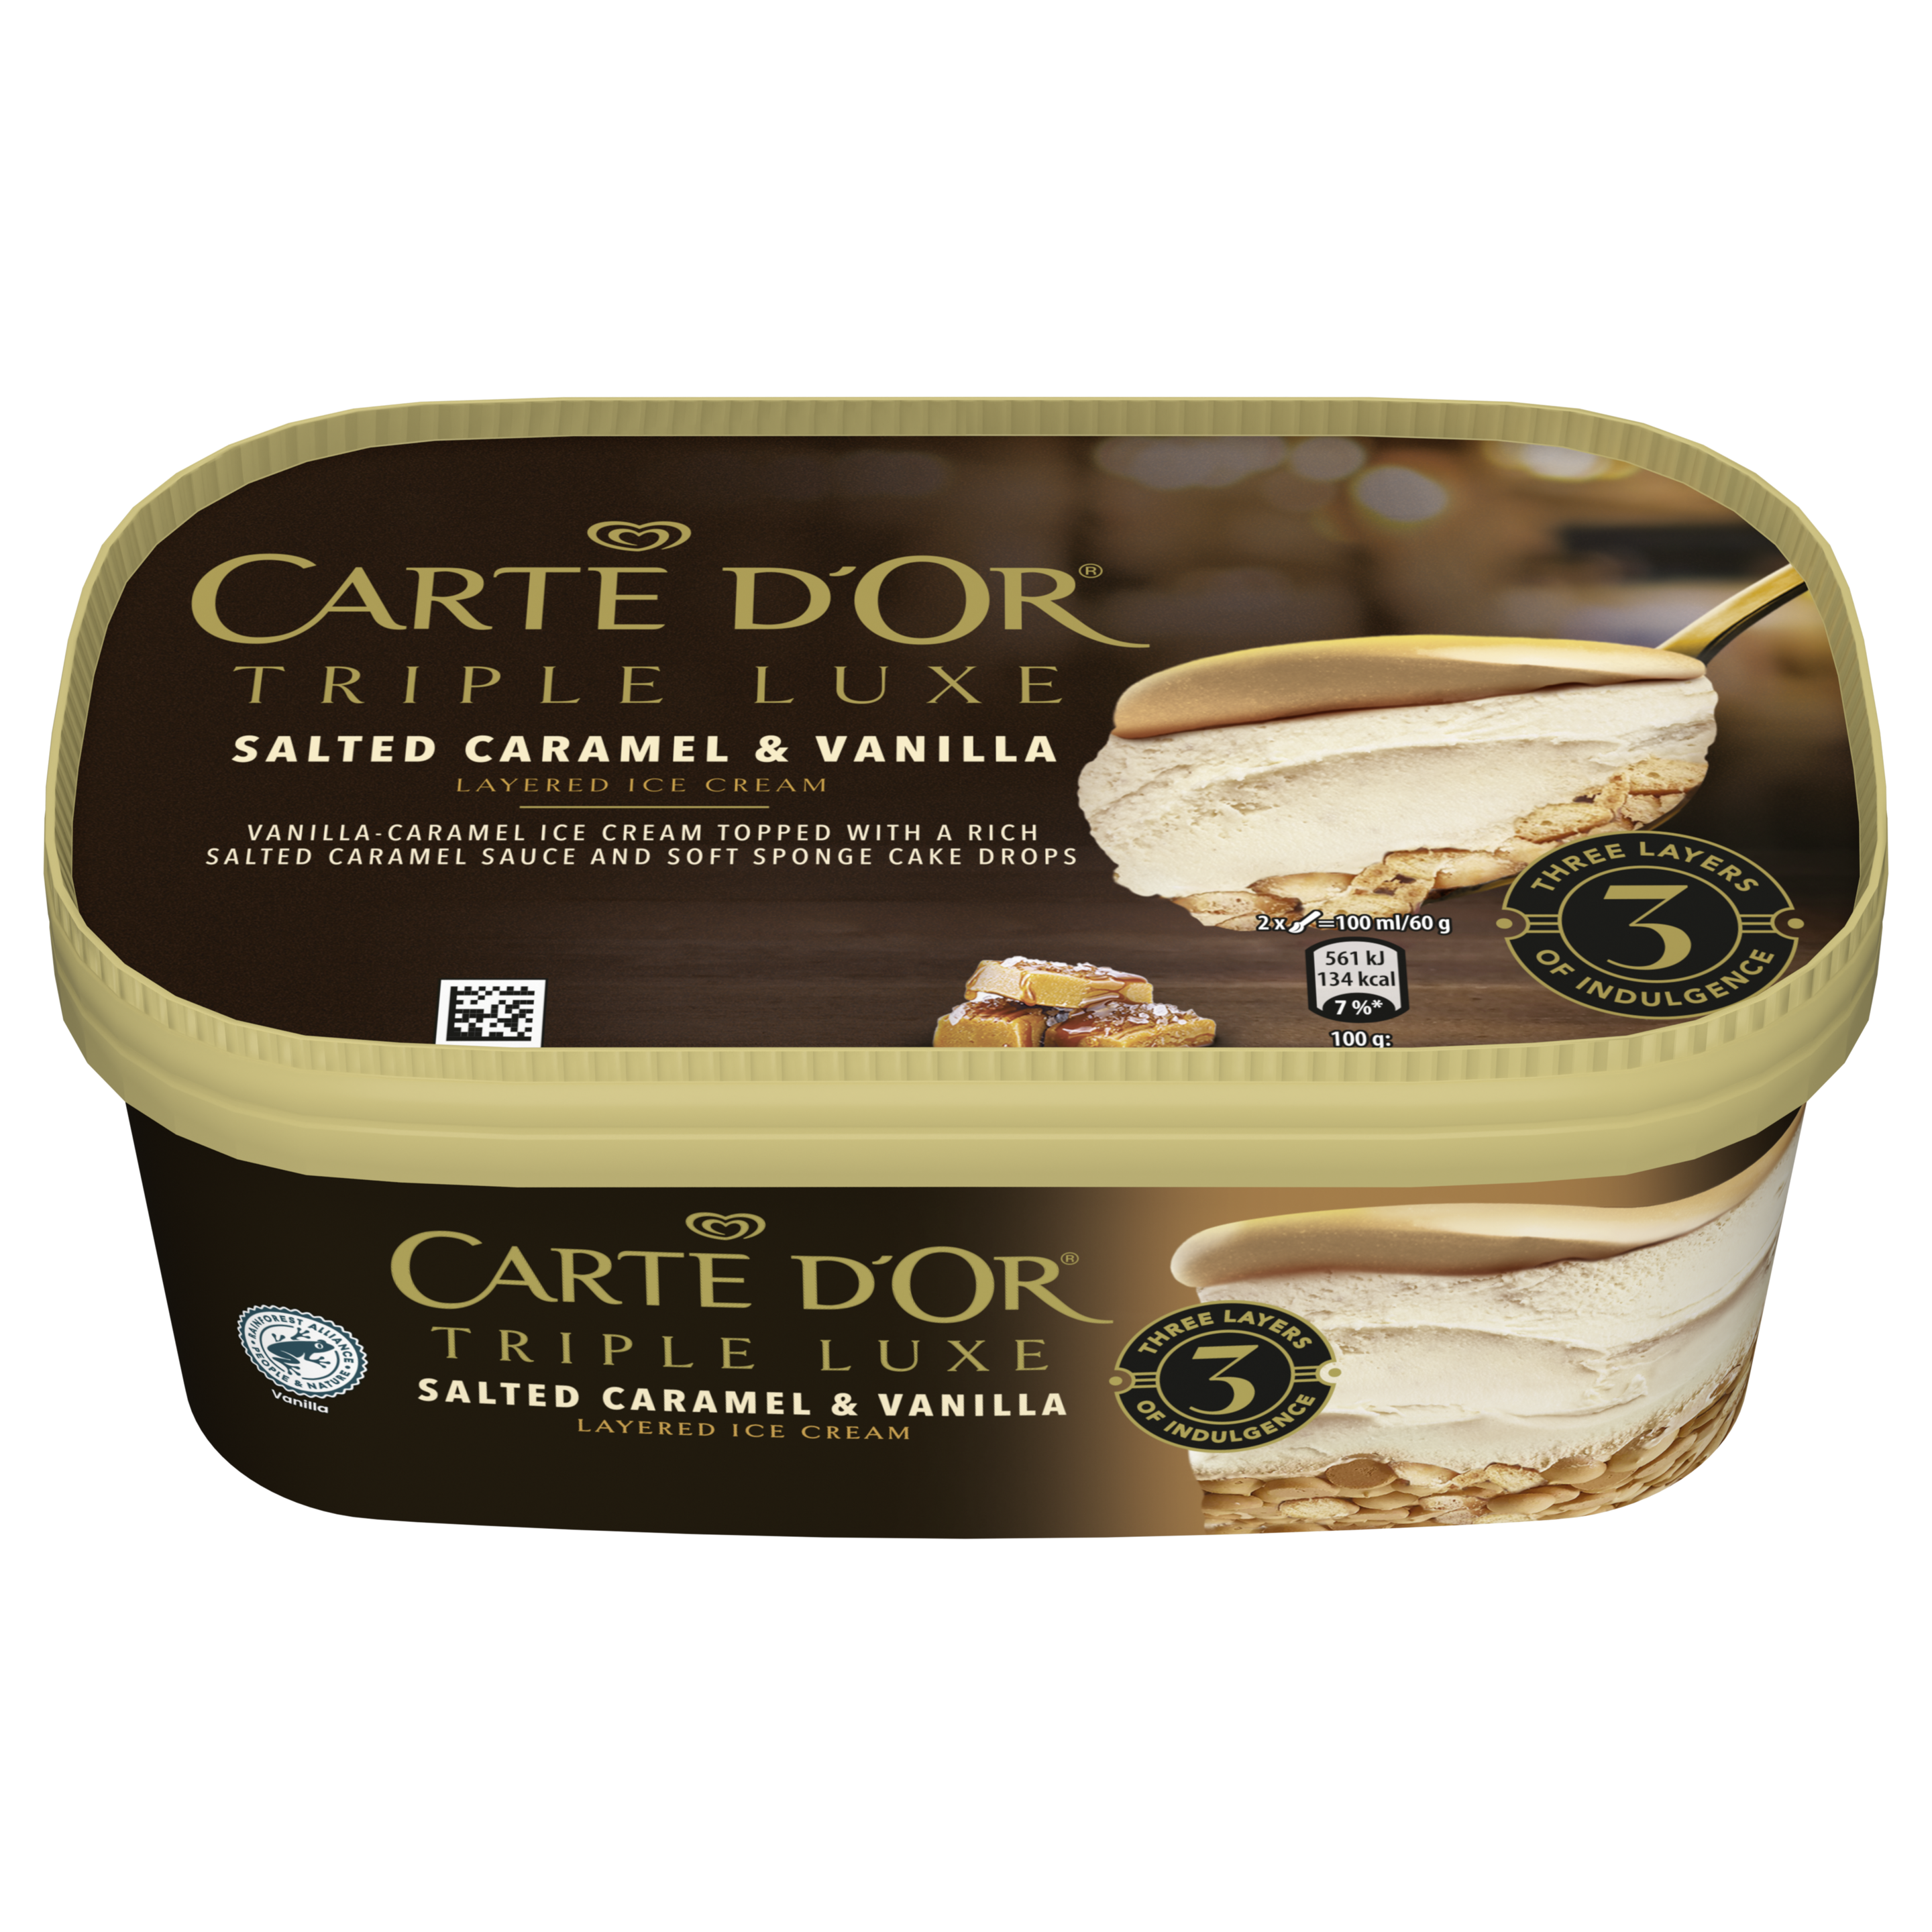 Carte D'or Triple Luxe Salted Caramel & Vanilla